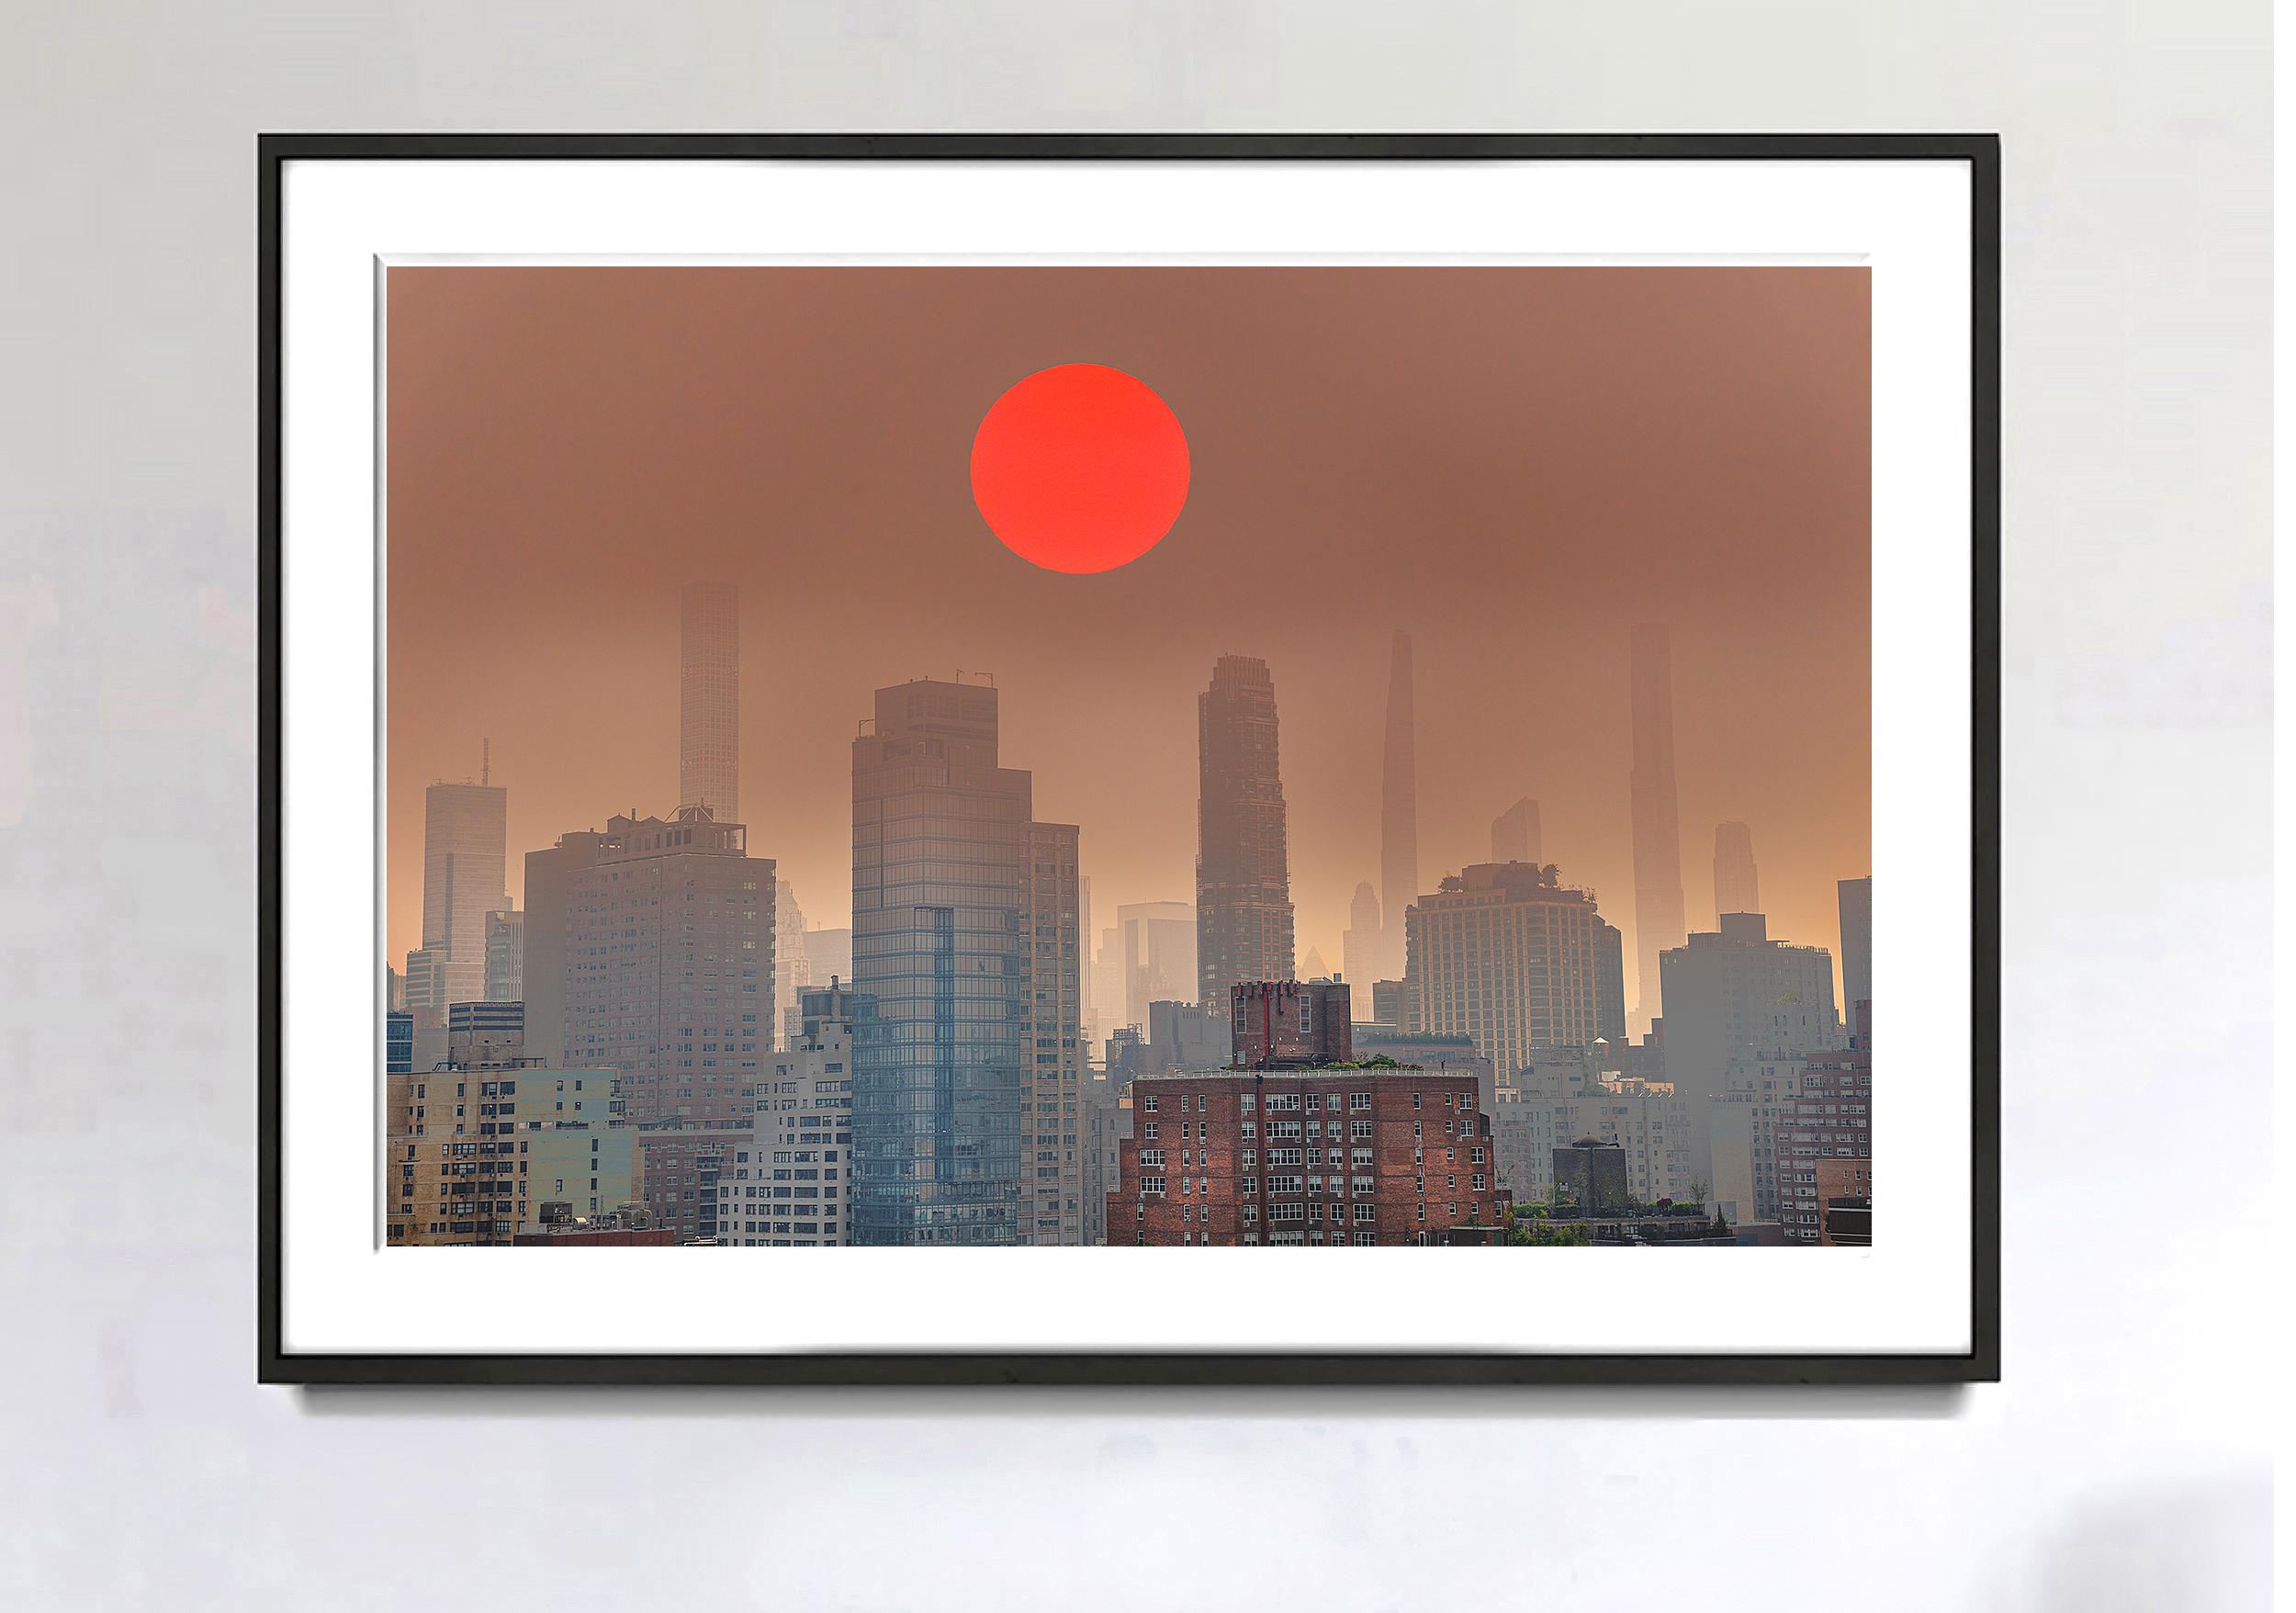 Pink Orange Sunset on Hazy Moody Sky Billionaires Row like Monet Polluted Sky - Photograph by Mitchell Funk